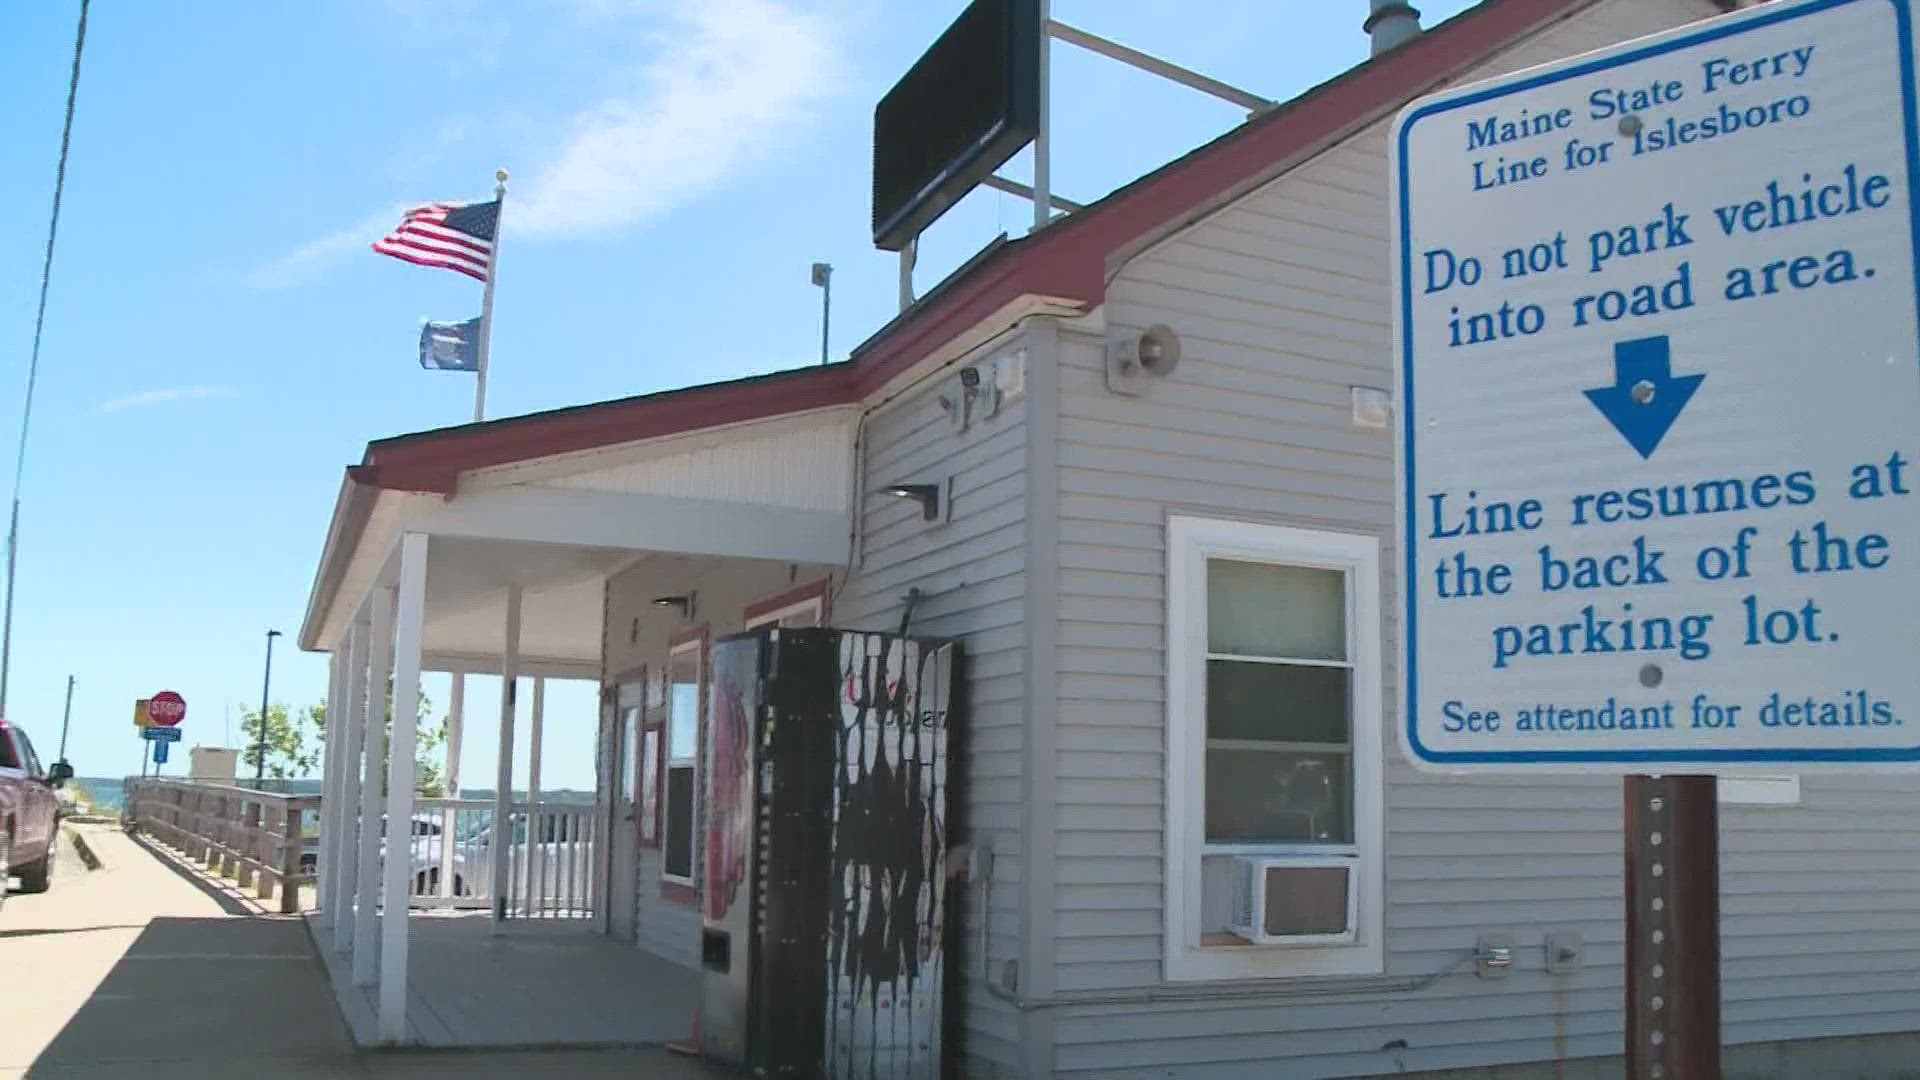 Maine DOT spokesman Paul Merrill says they had to cancel runs on Penobscot Bay ferries a total of 29 times from early May through July 4.